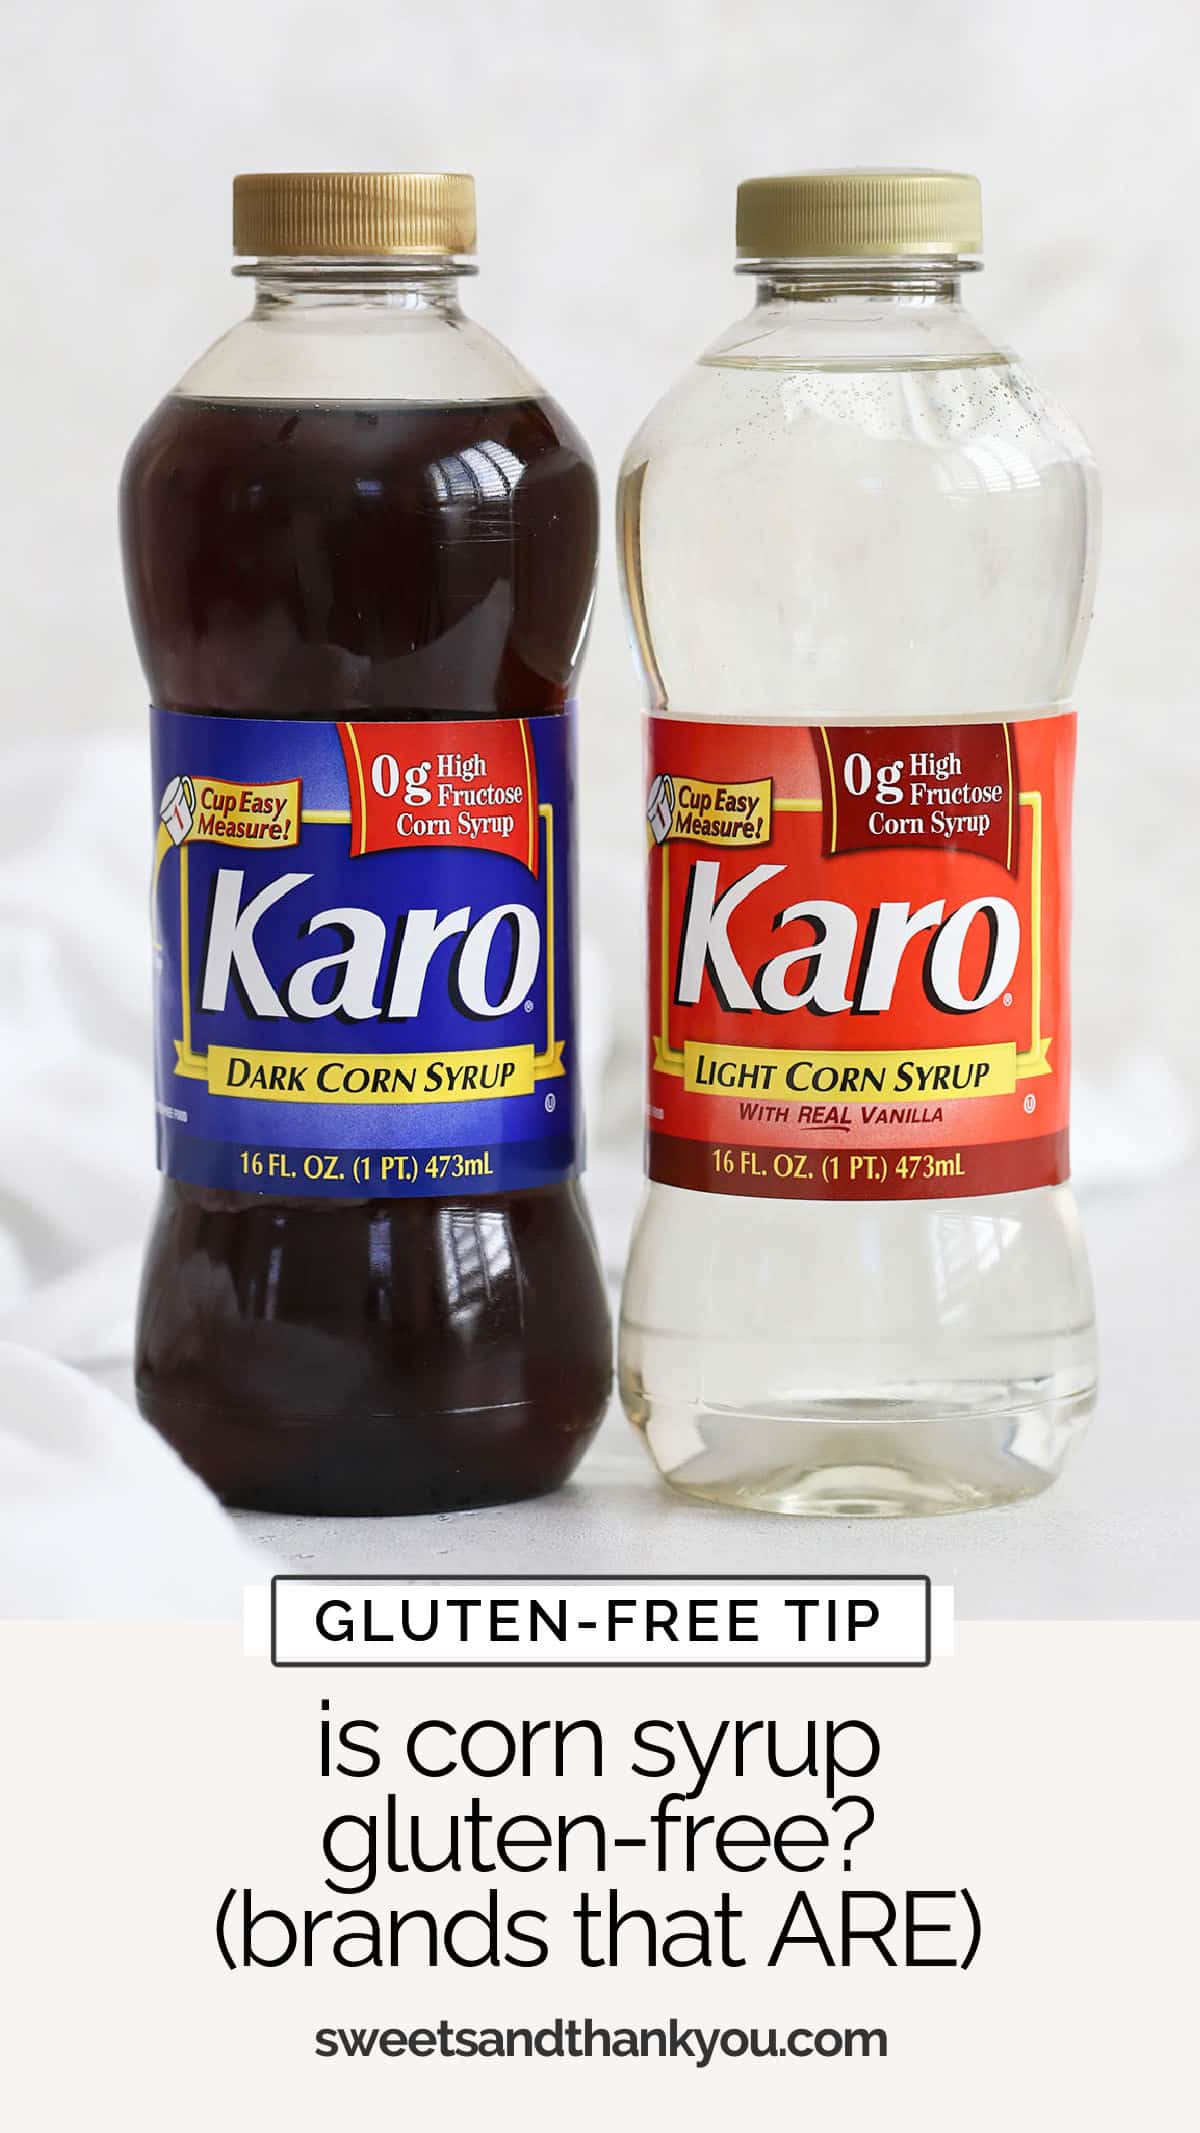 Wondering if corn syrup is gluten-free? What about Karo syrup? Get the scoop on which varieties are safe to eat, what to watch out for & more! / is karo syrup gluten free / is high fructose corn syrup gluten free / types of corn syrup / light corn syrup vs dark corn syrup / corn syrup in baking / best substitute for corn syrup in baking / is karo corn syrup gluten free / gluten free baking tips / gluten free tips